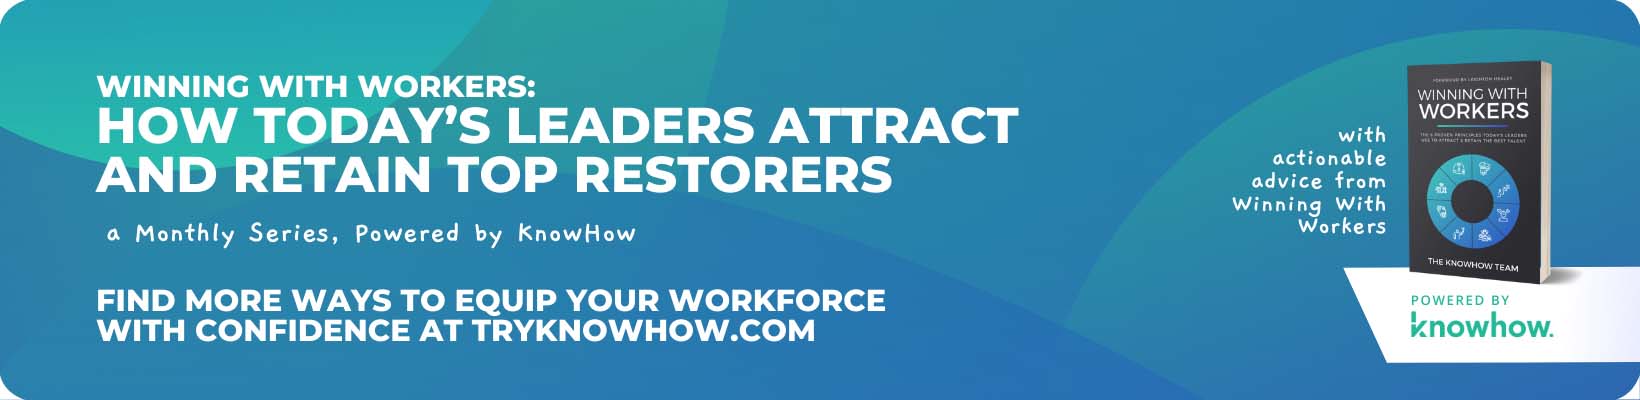 How Todays Leaders Attract and Retain Top Restorers